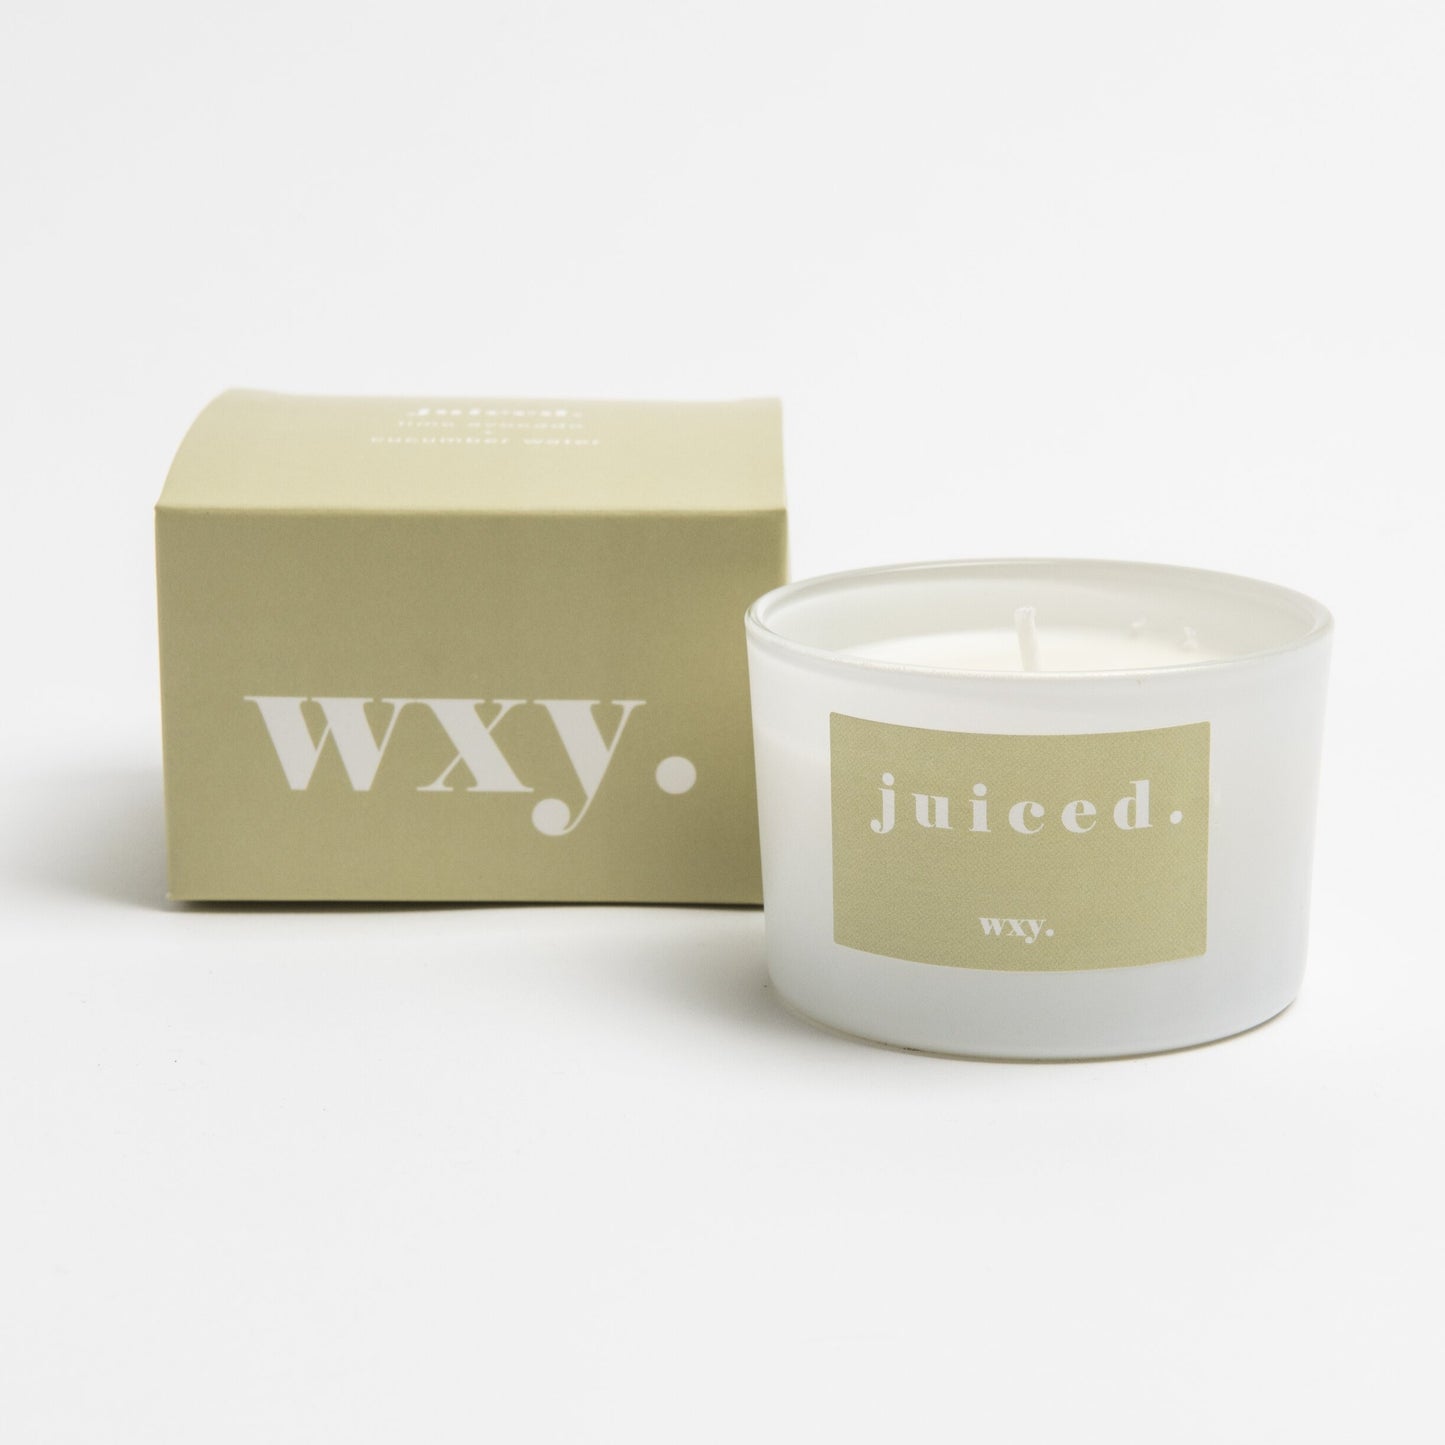 wxy. JUICED Lime Avocado + Cucumber Water 3oz Candle